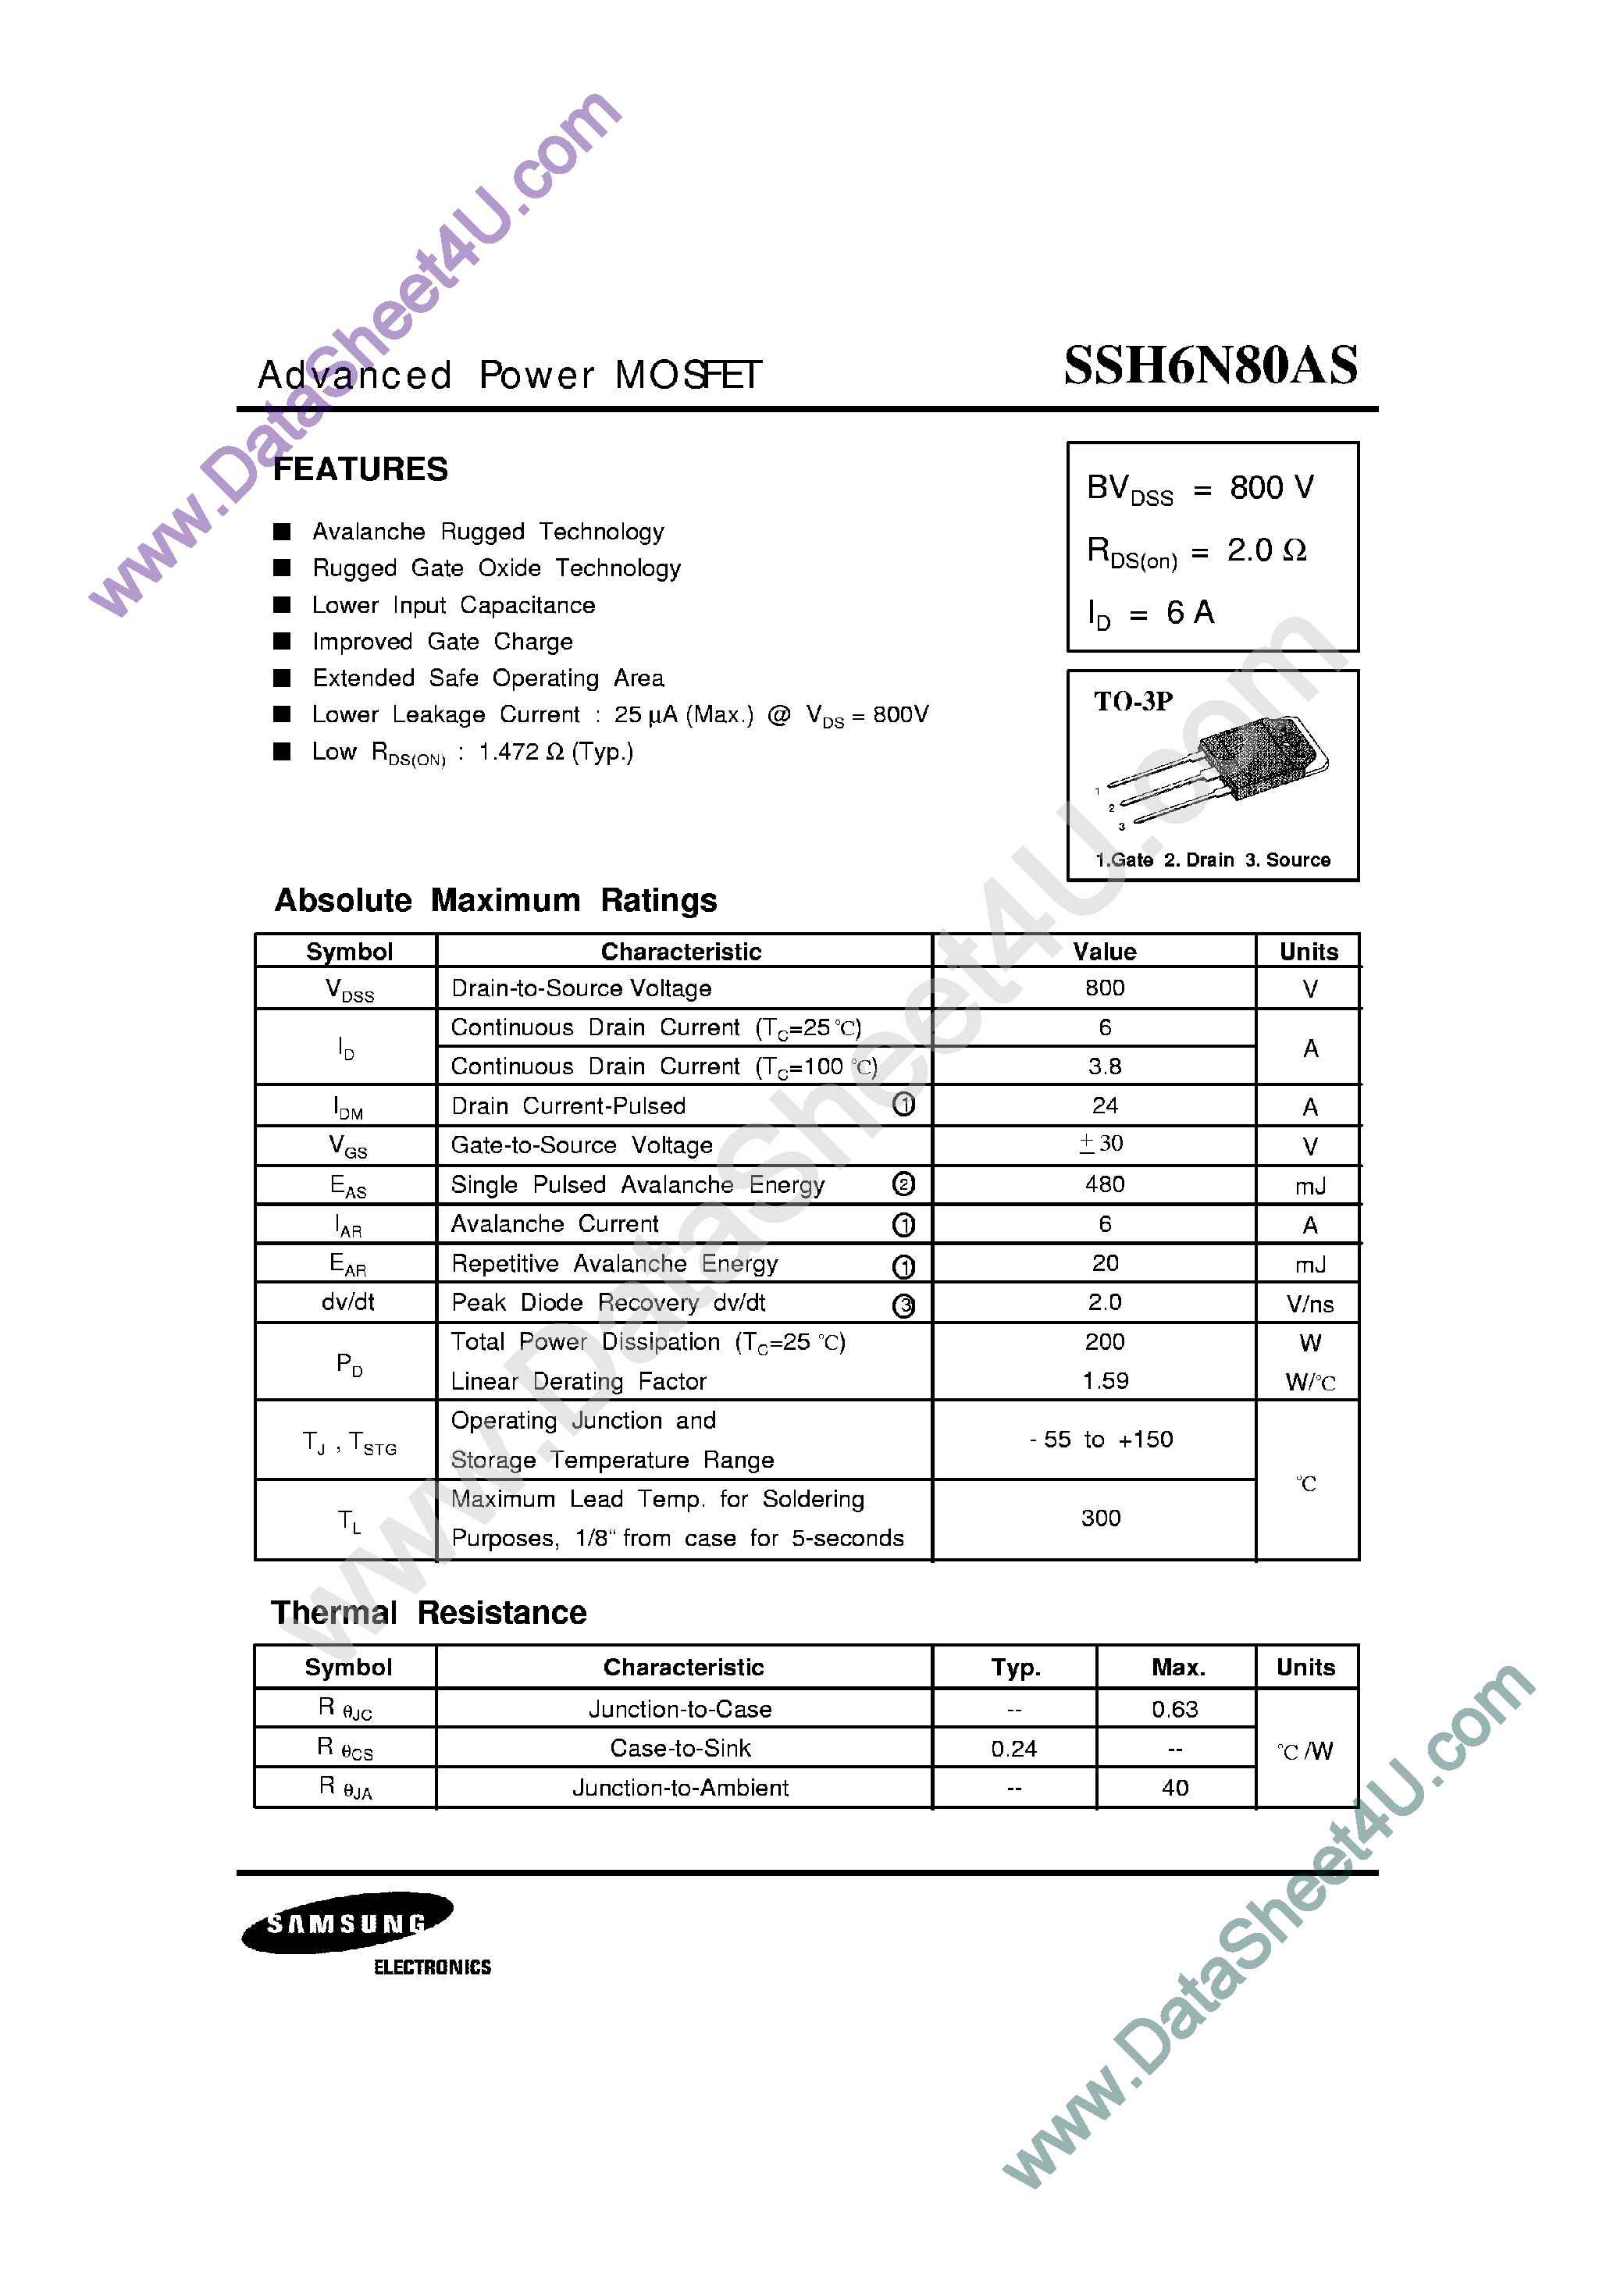 Datasheet SSH6N80AS - Advanced Power MOSFET page 1